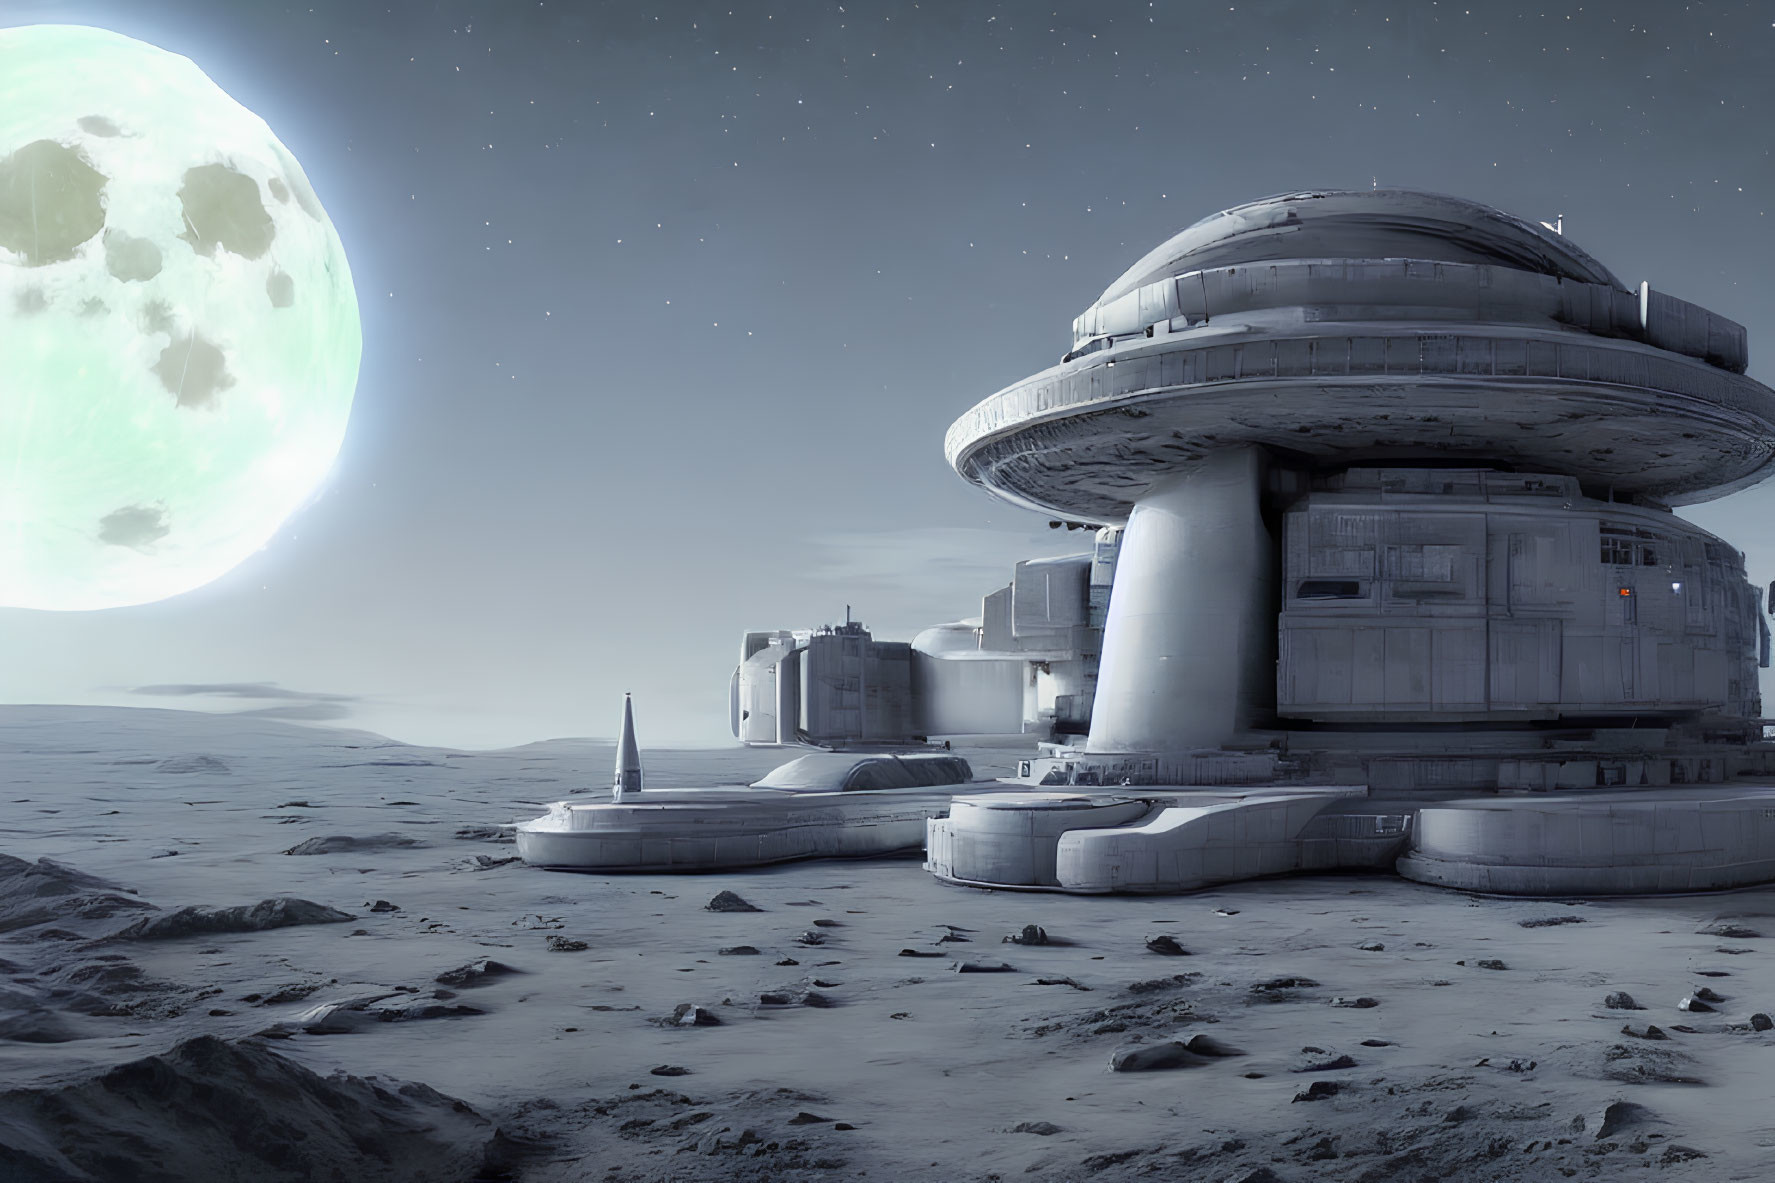 Futuristic lunar base on desolate moon surface with green-tinged planet